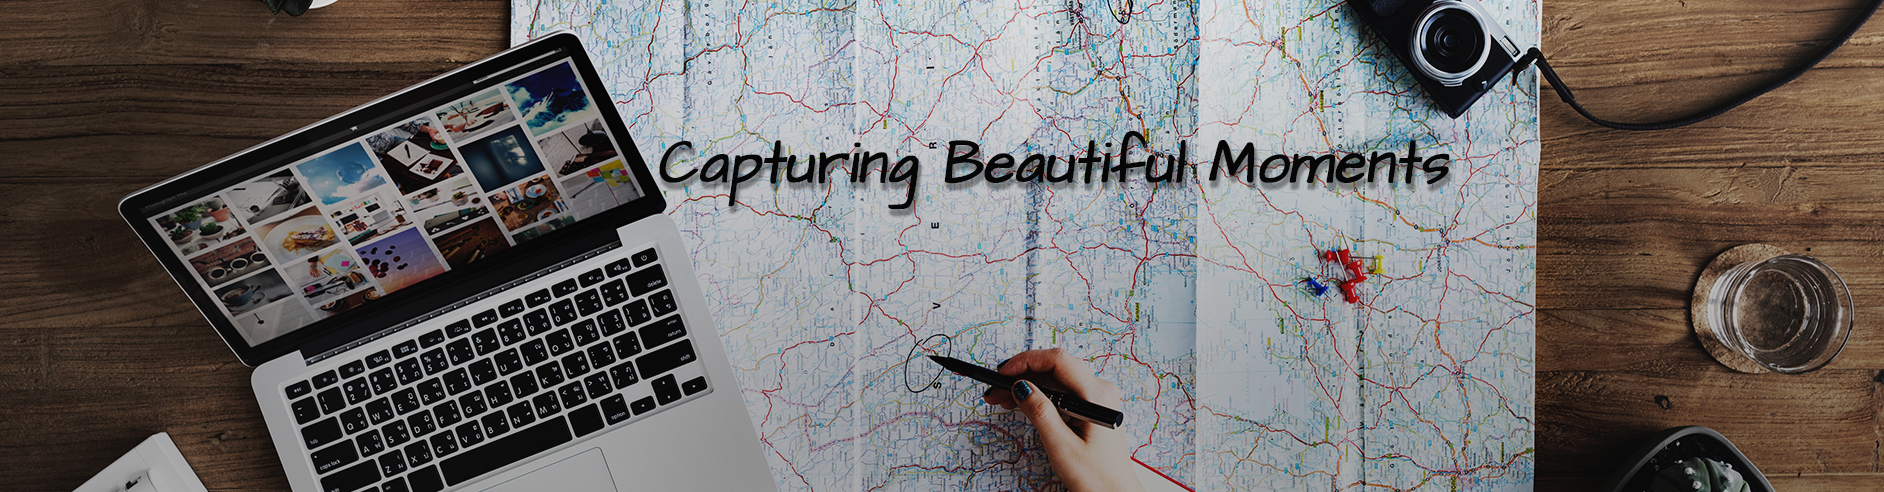 Capturing Beautiful Moments, a map, a laptop and a camera, planning my next trip